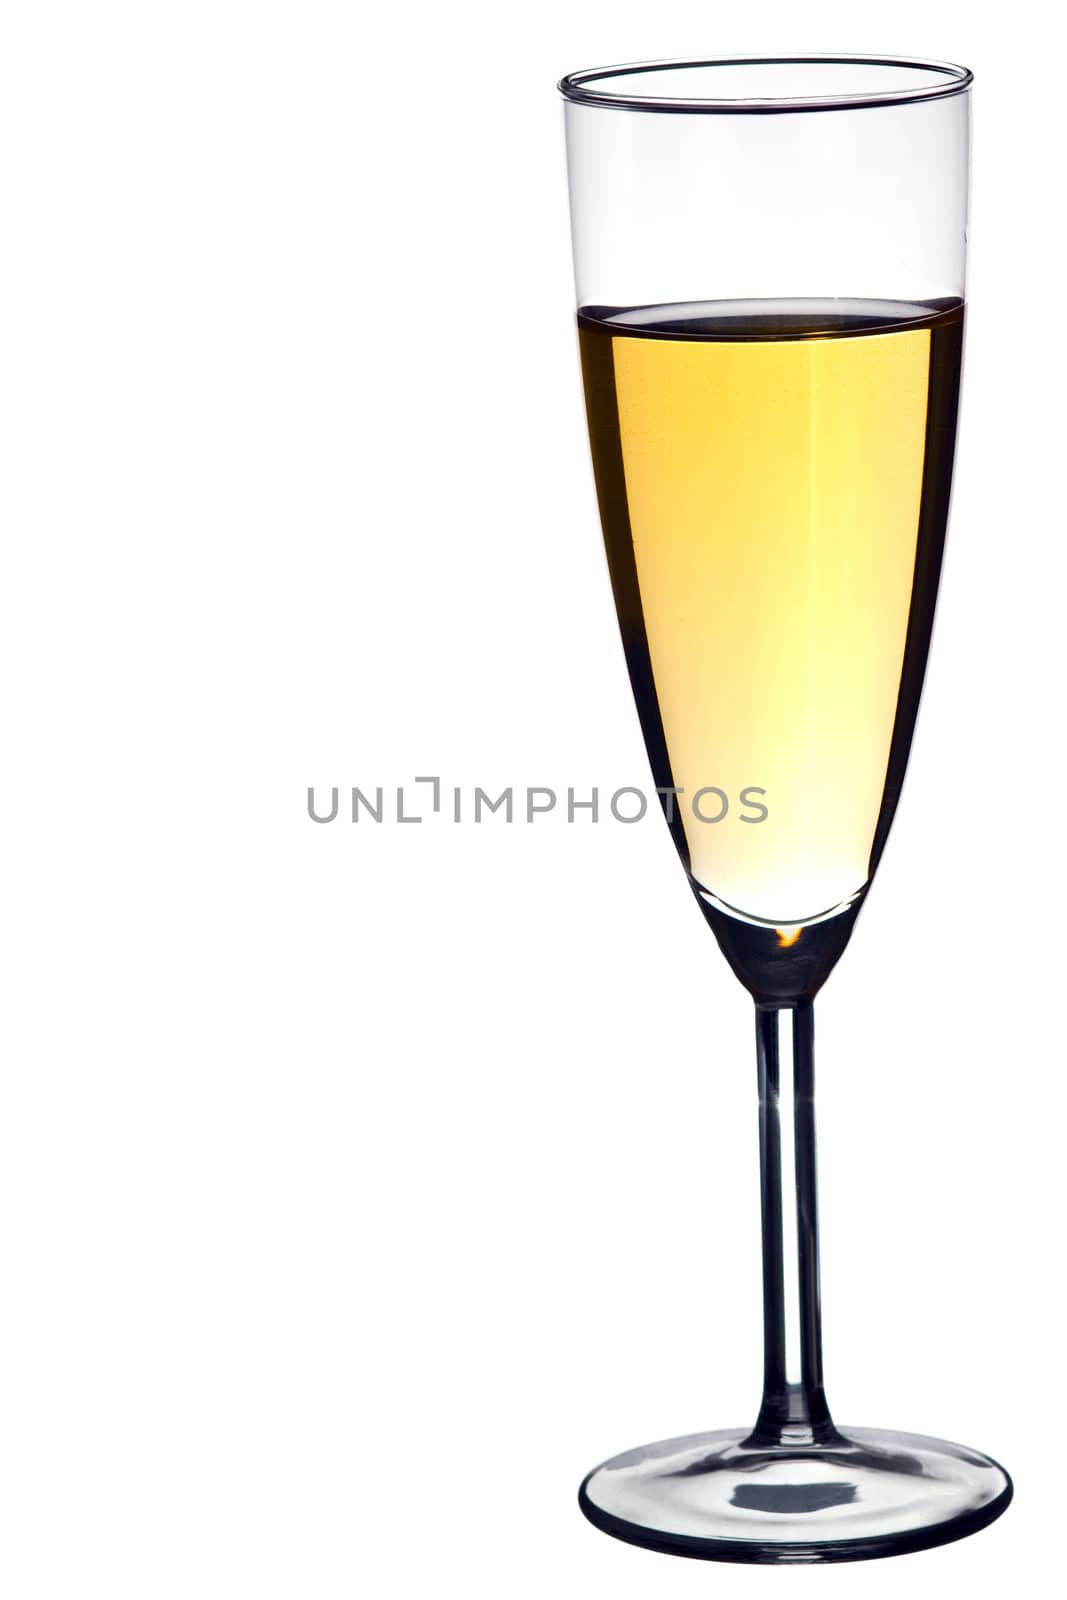 Glass of white wine against a pure white background